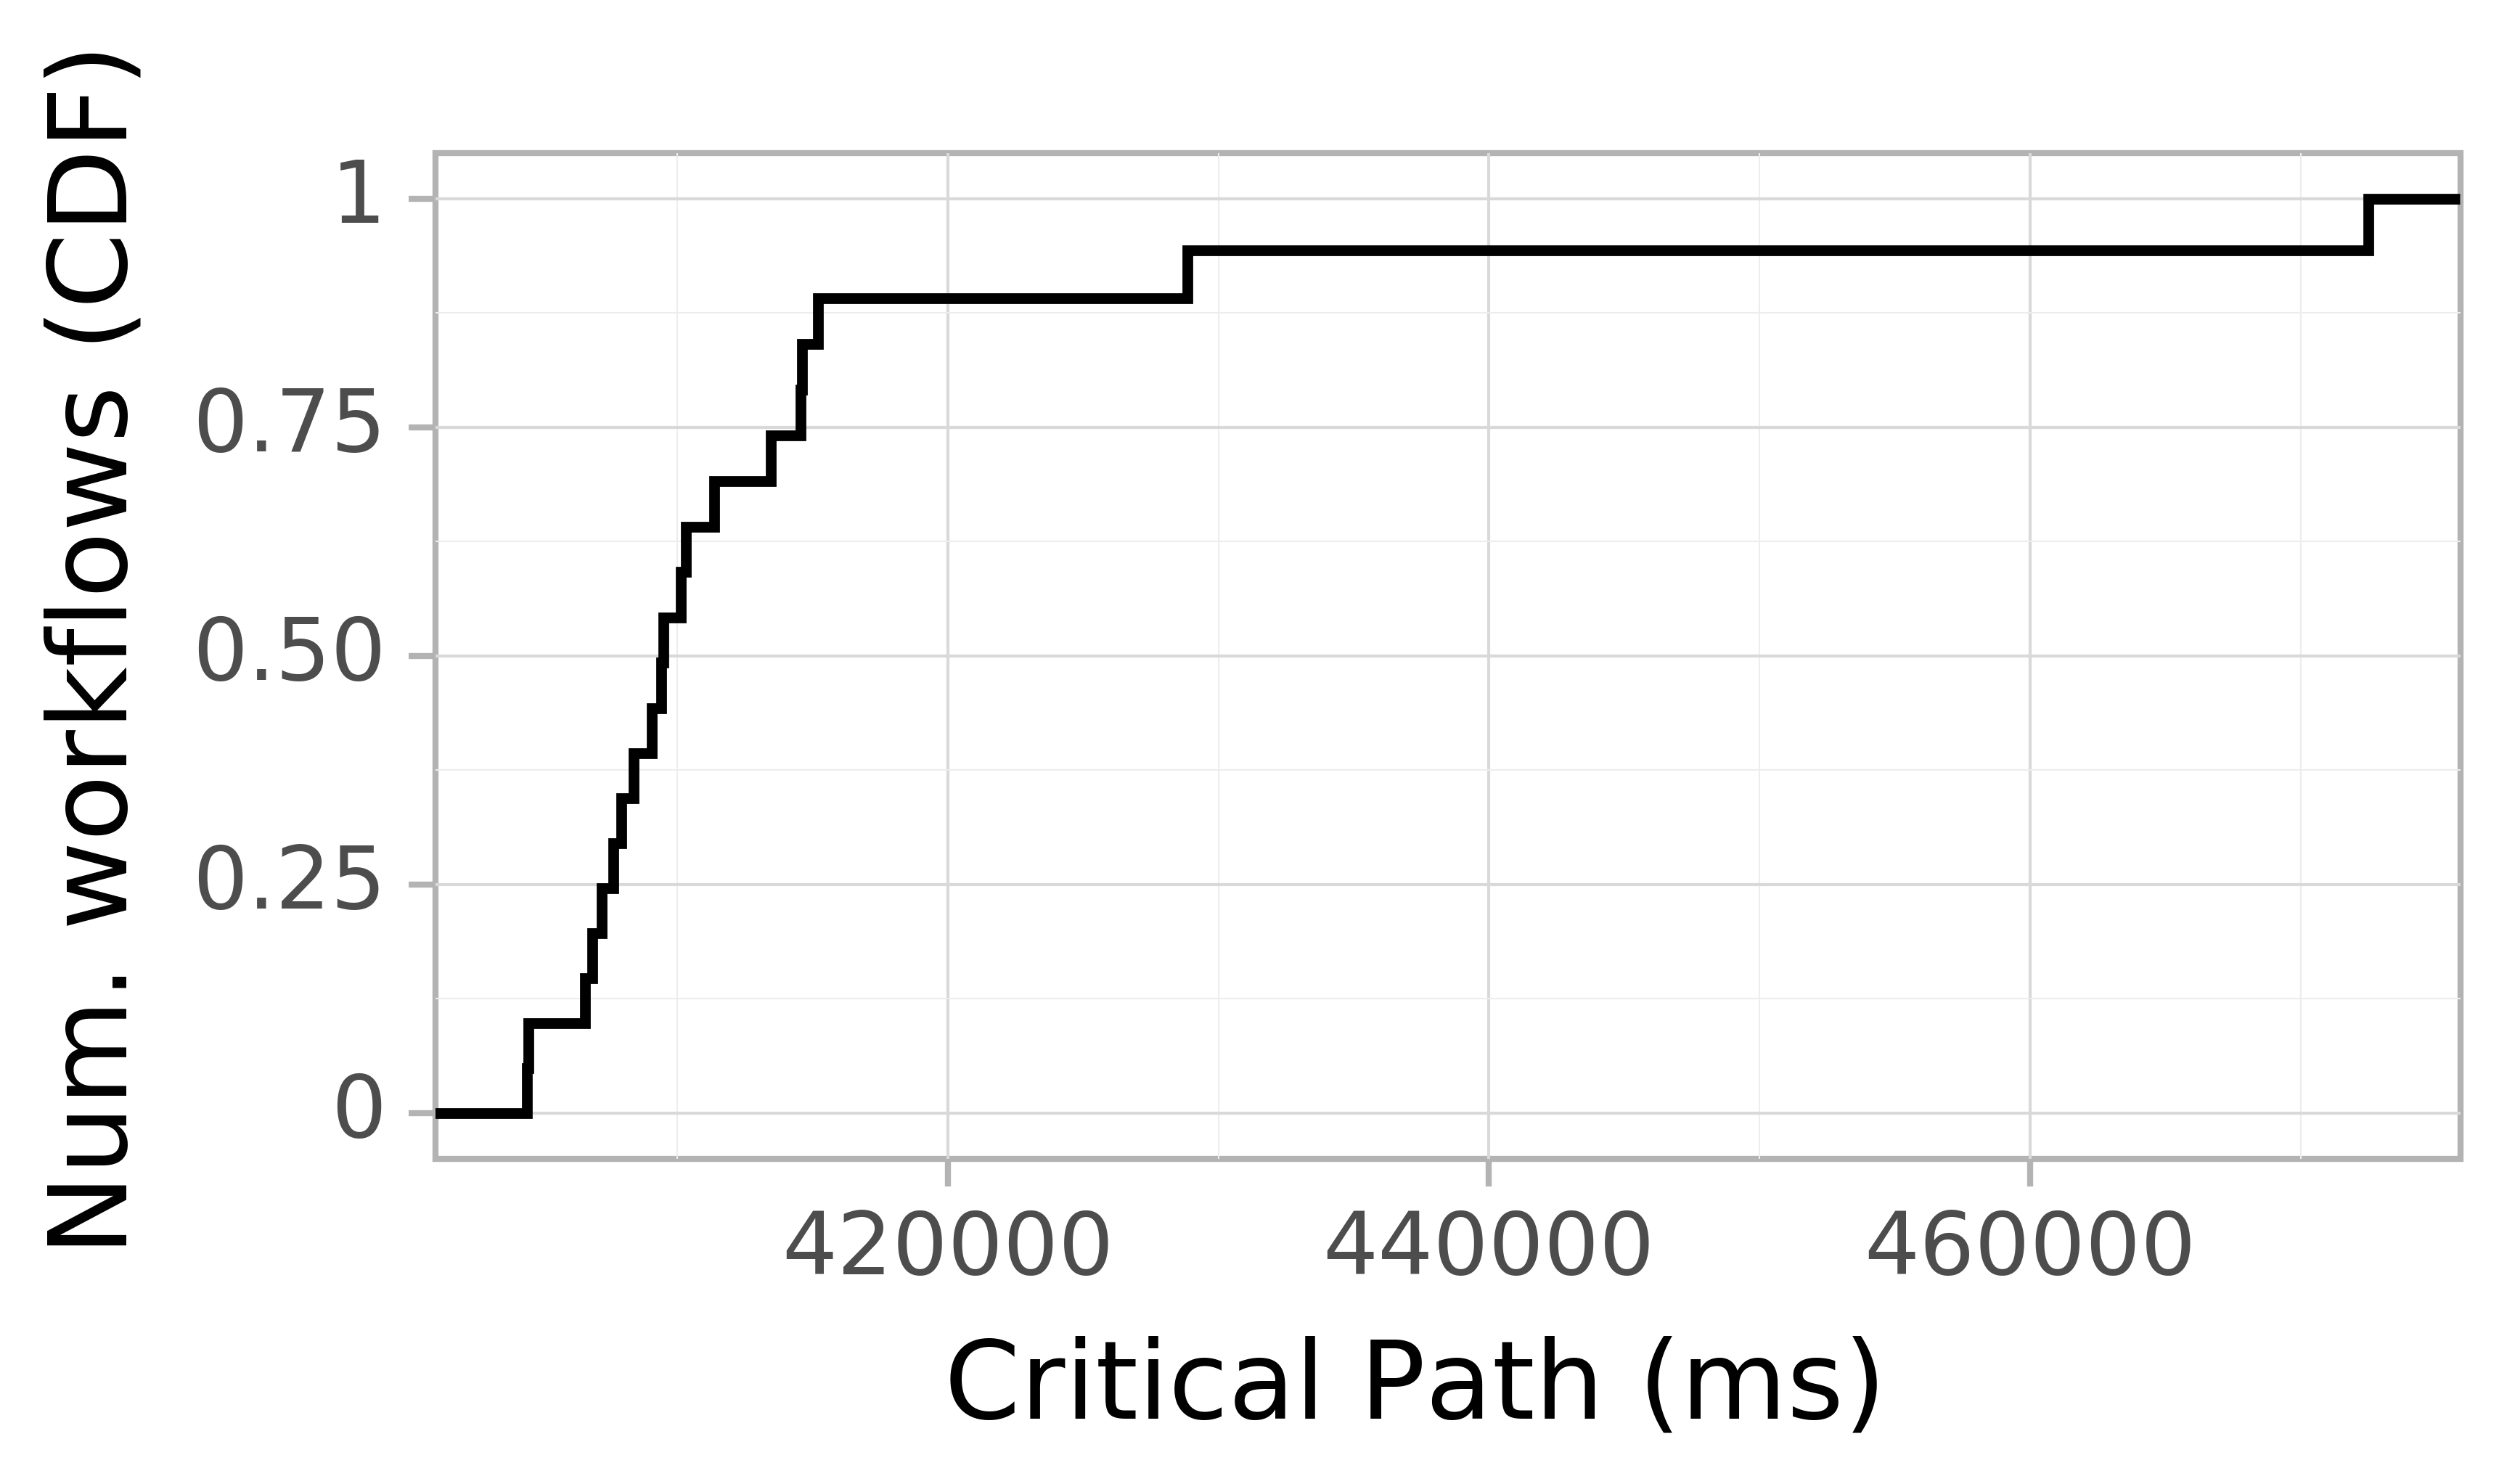 Job runtime CDF graph for the askalon-new_ee16 trace.